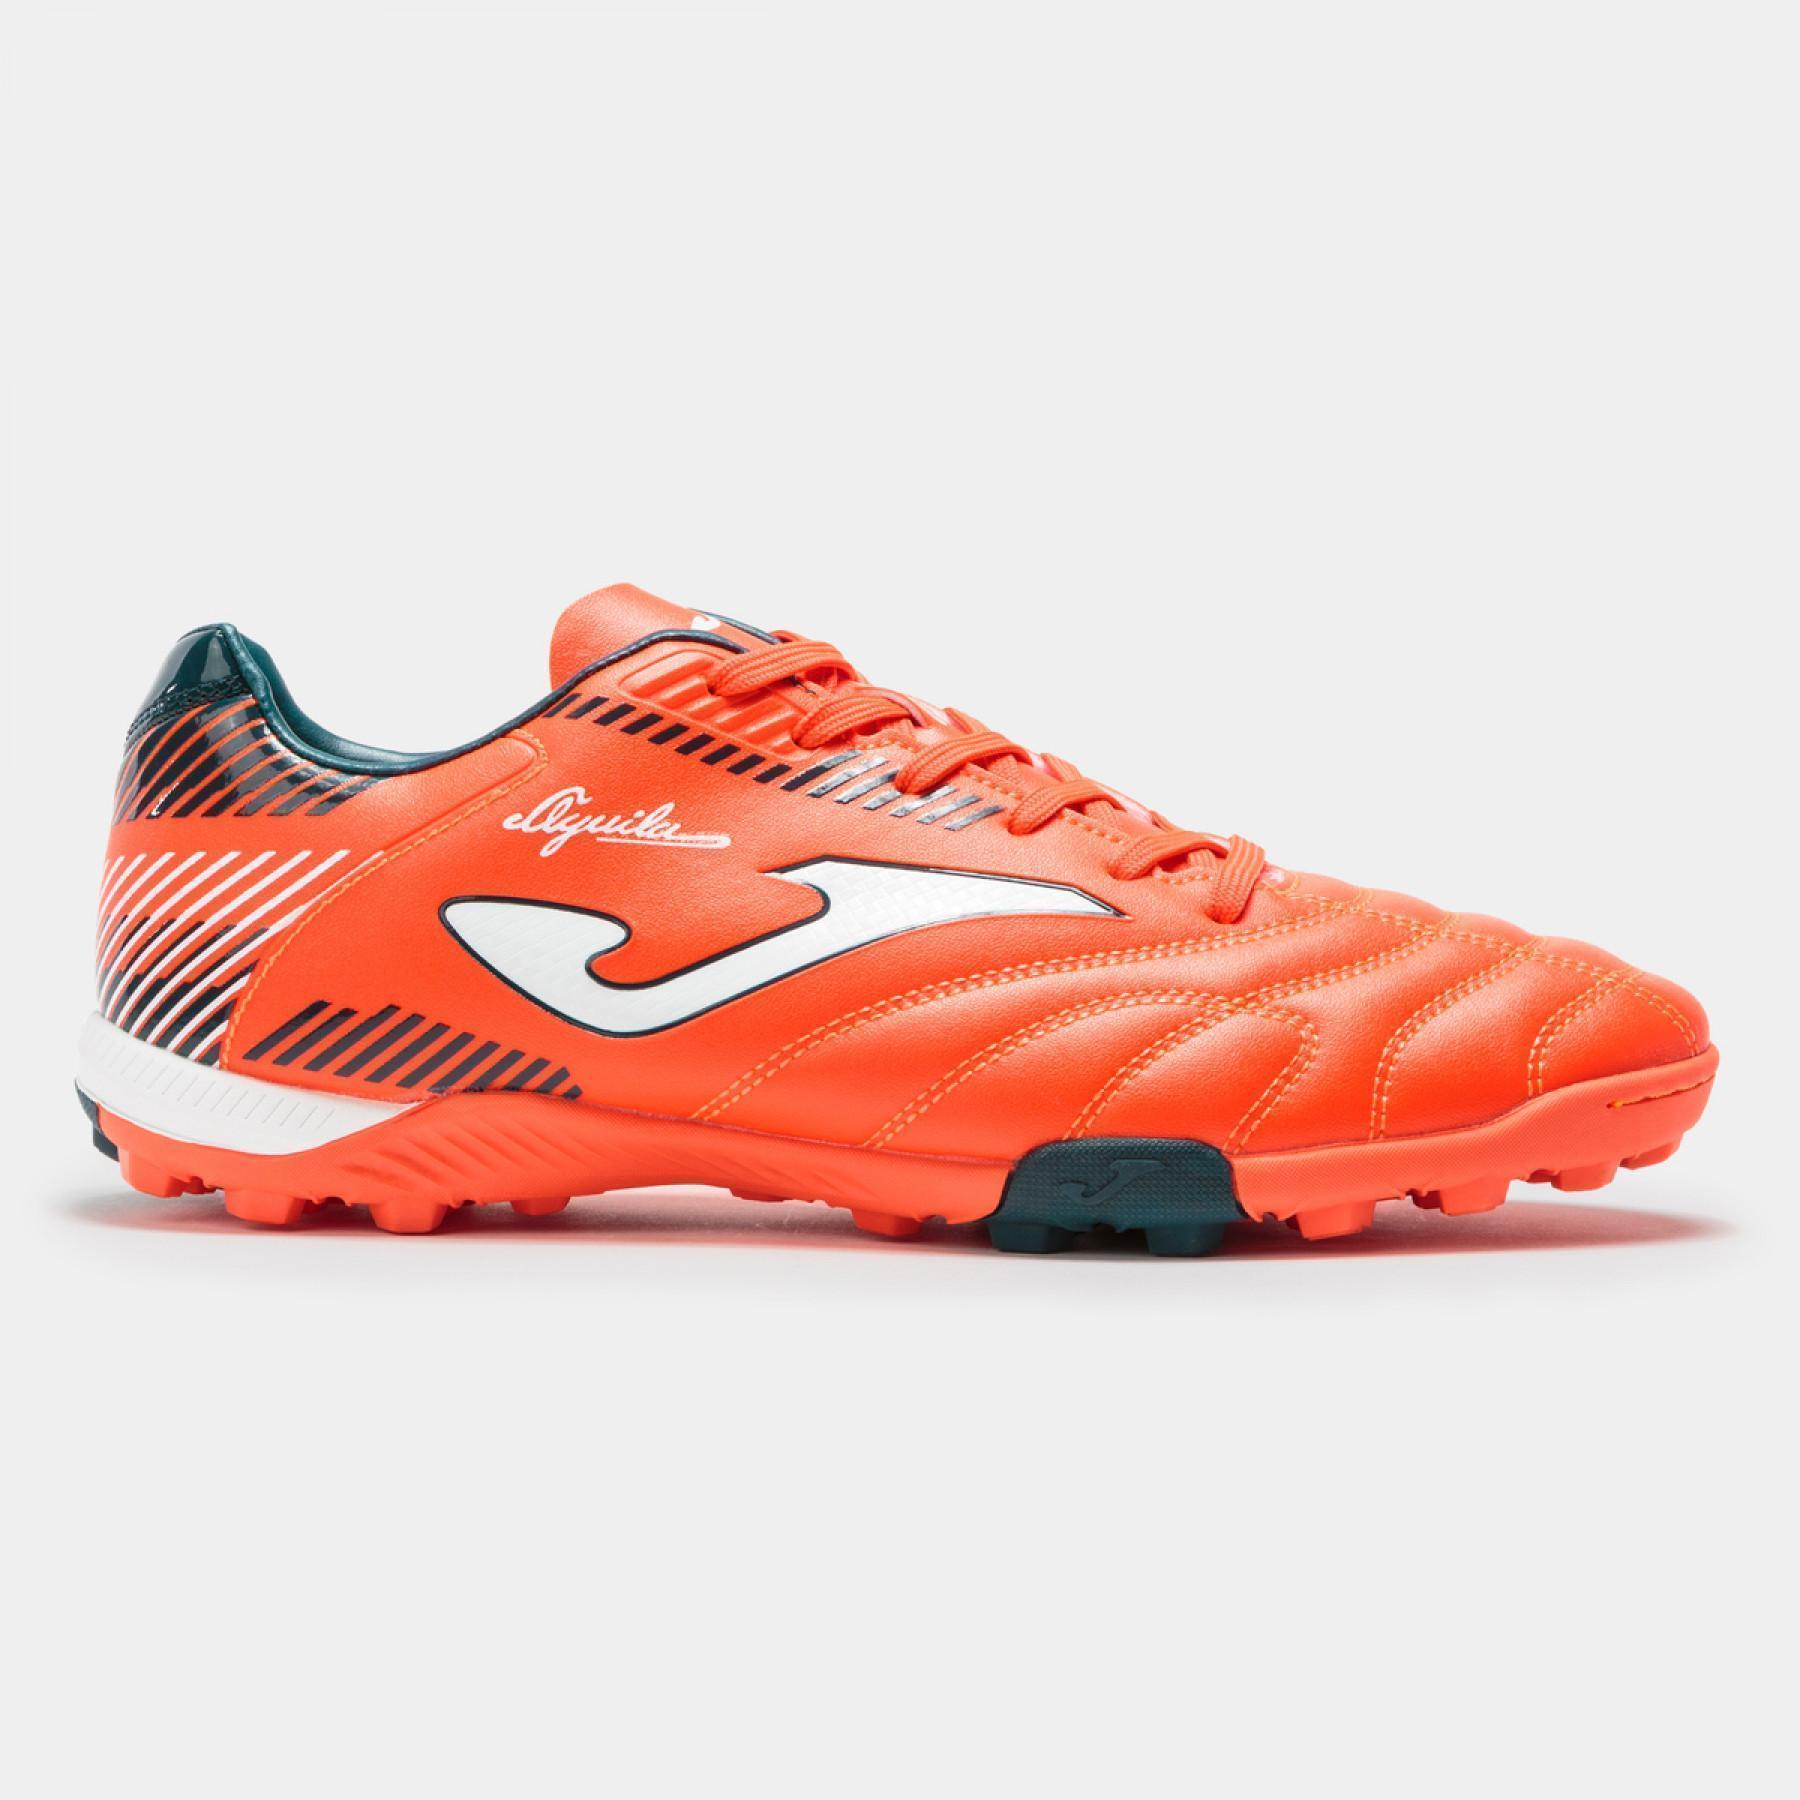 Chaussures Joma Aguila Turf 2008